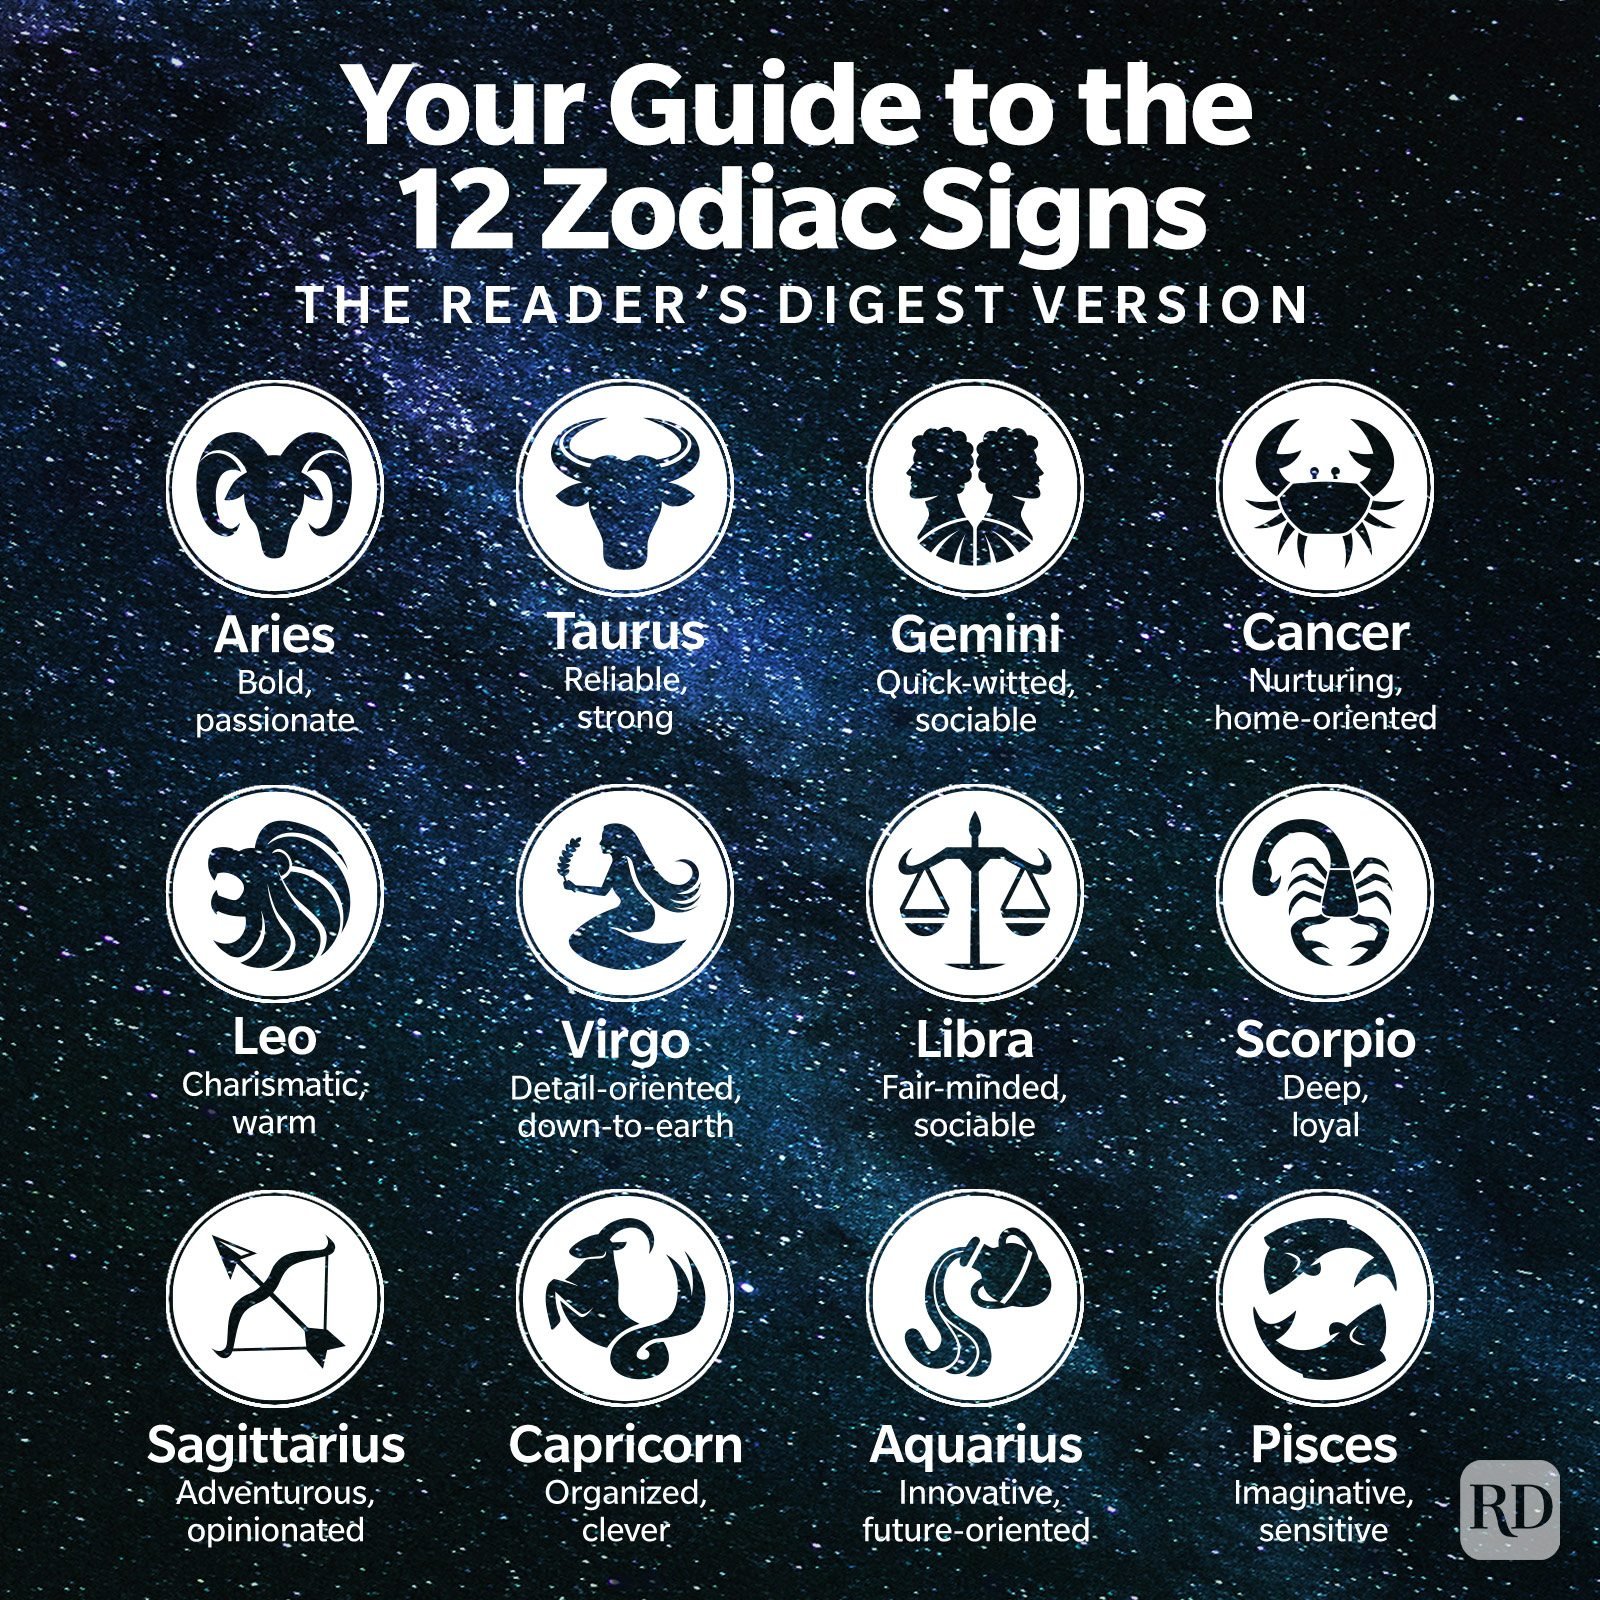 Zodiac signs guide infographic on starry galaxy Milky Way background